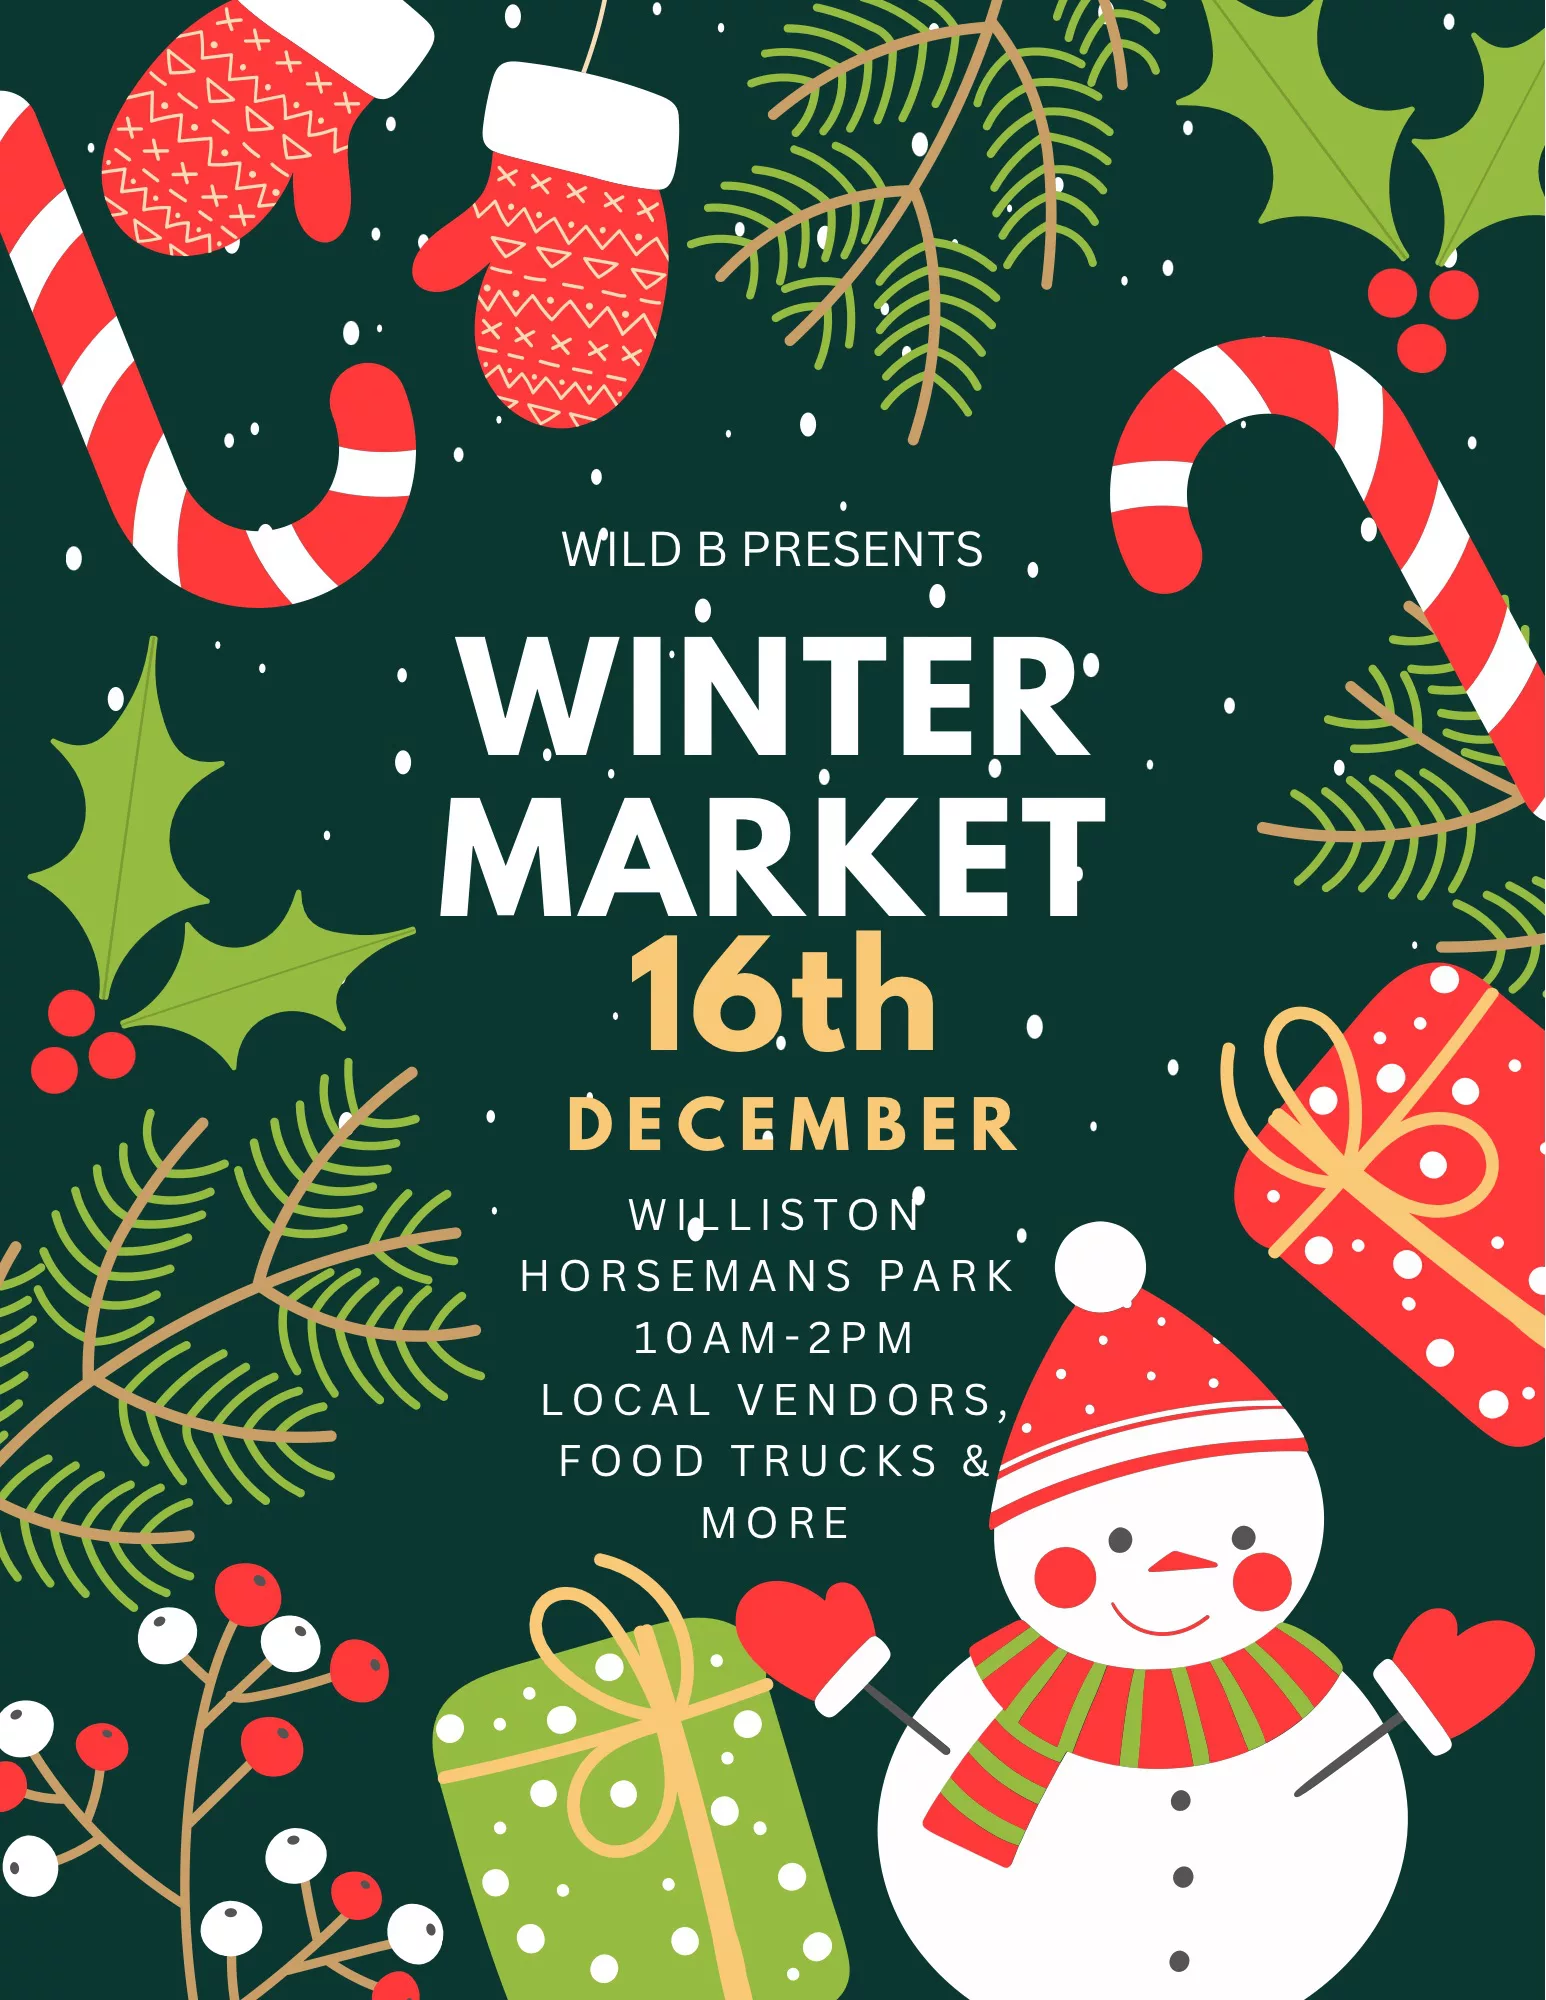 Williston Horsemans Park Winter Market 2023. One of the best things to do in Florida for Christmas. Keep reading to find out more of the best things to do in Gainesville for Christmas.